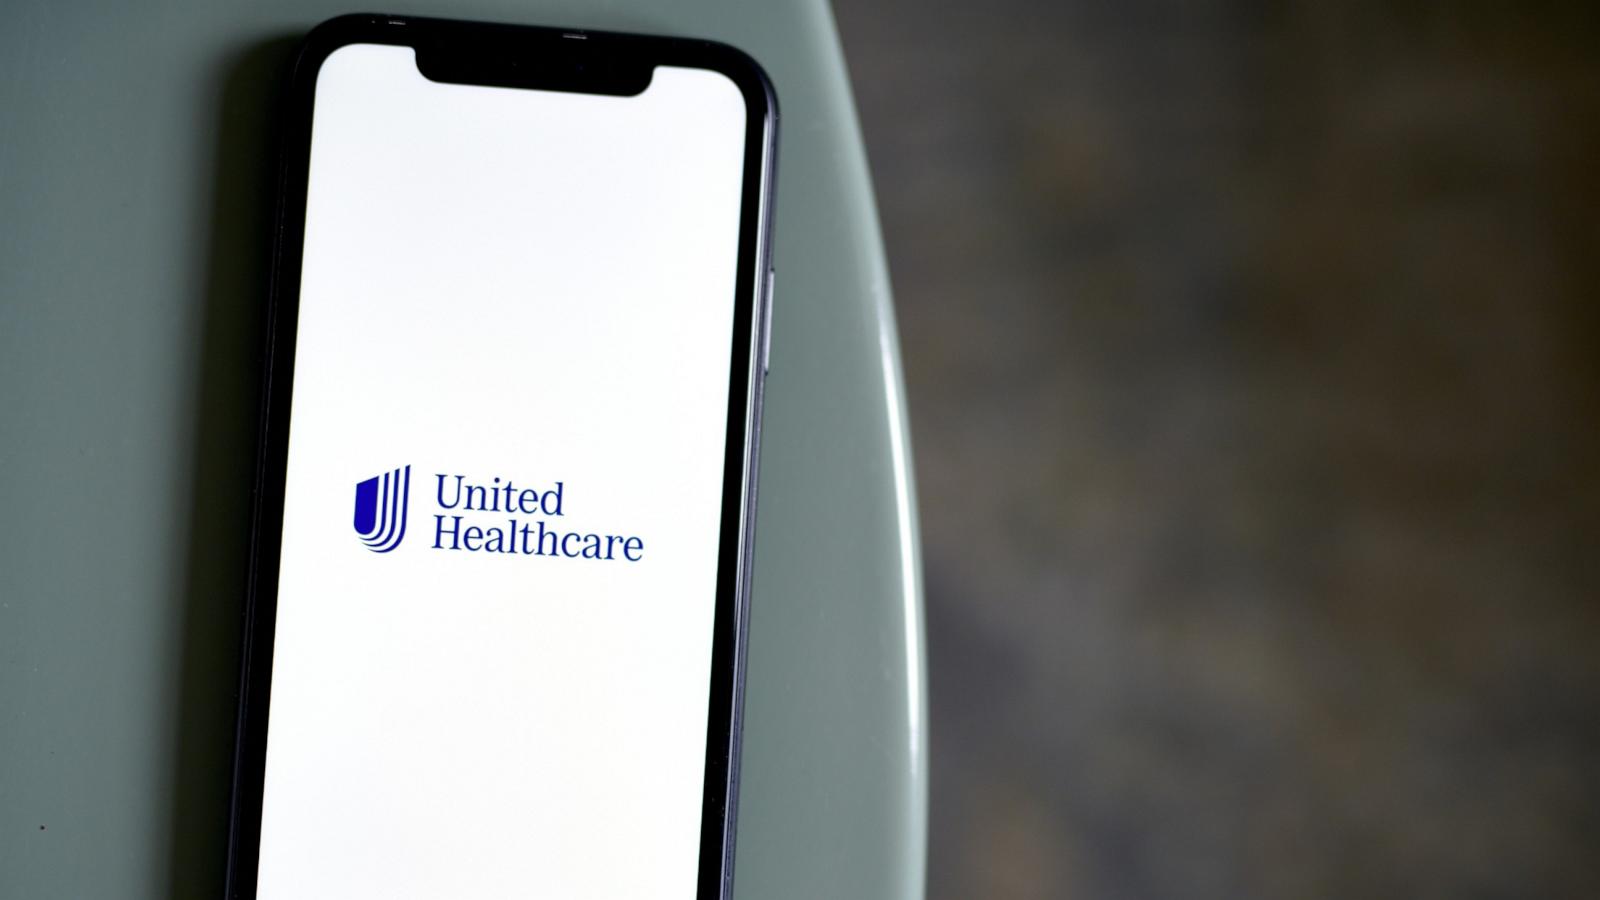 UnitedHealth Provides an Update on Their Efforts To Recover From a Significant Cyberattack